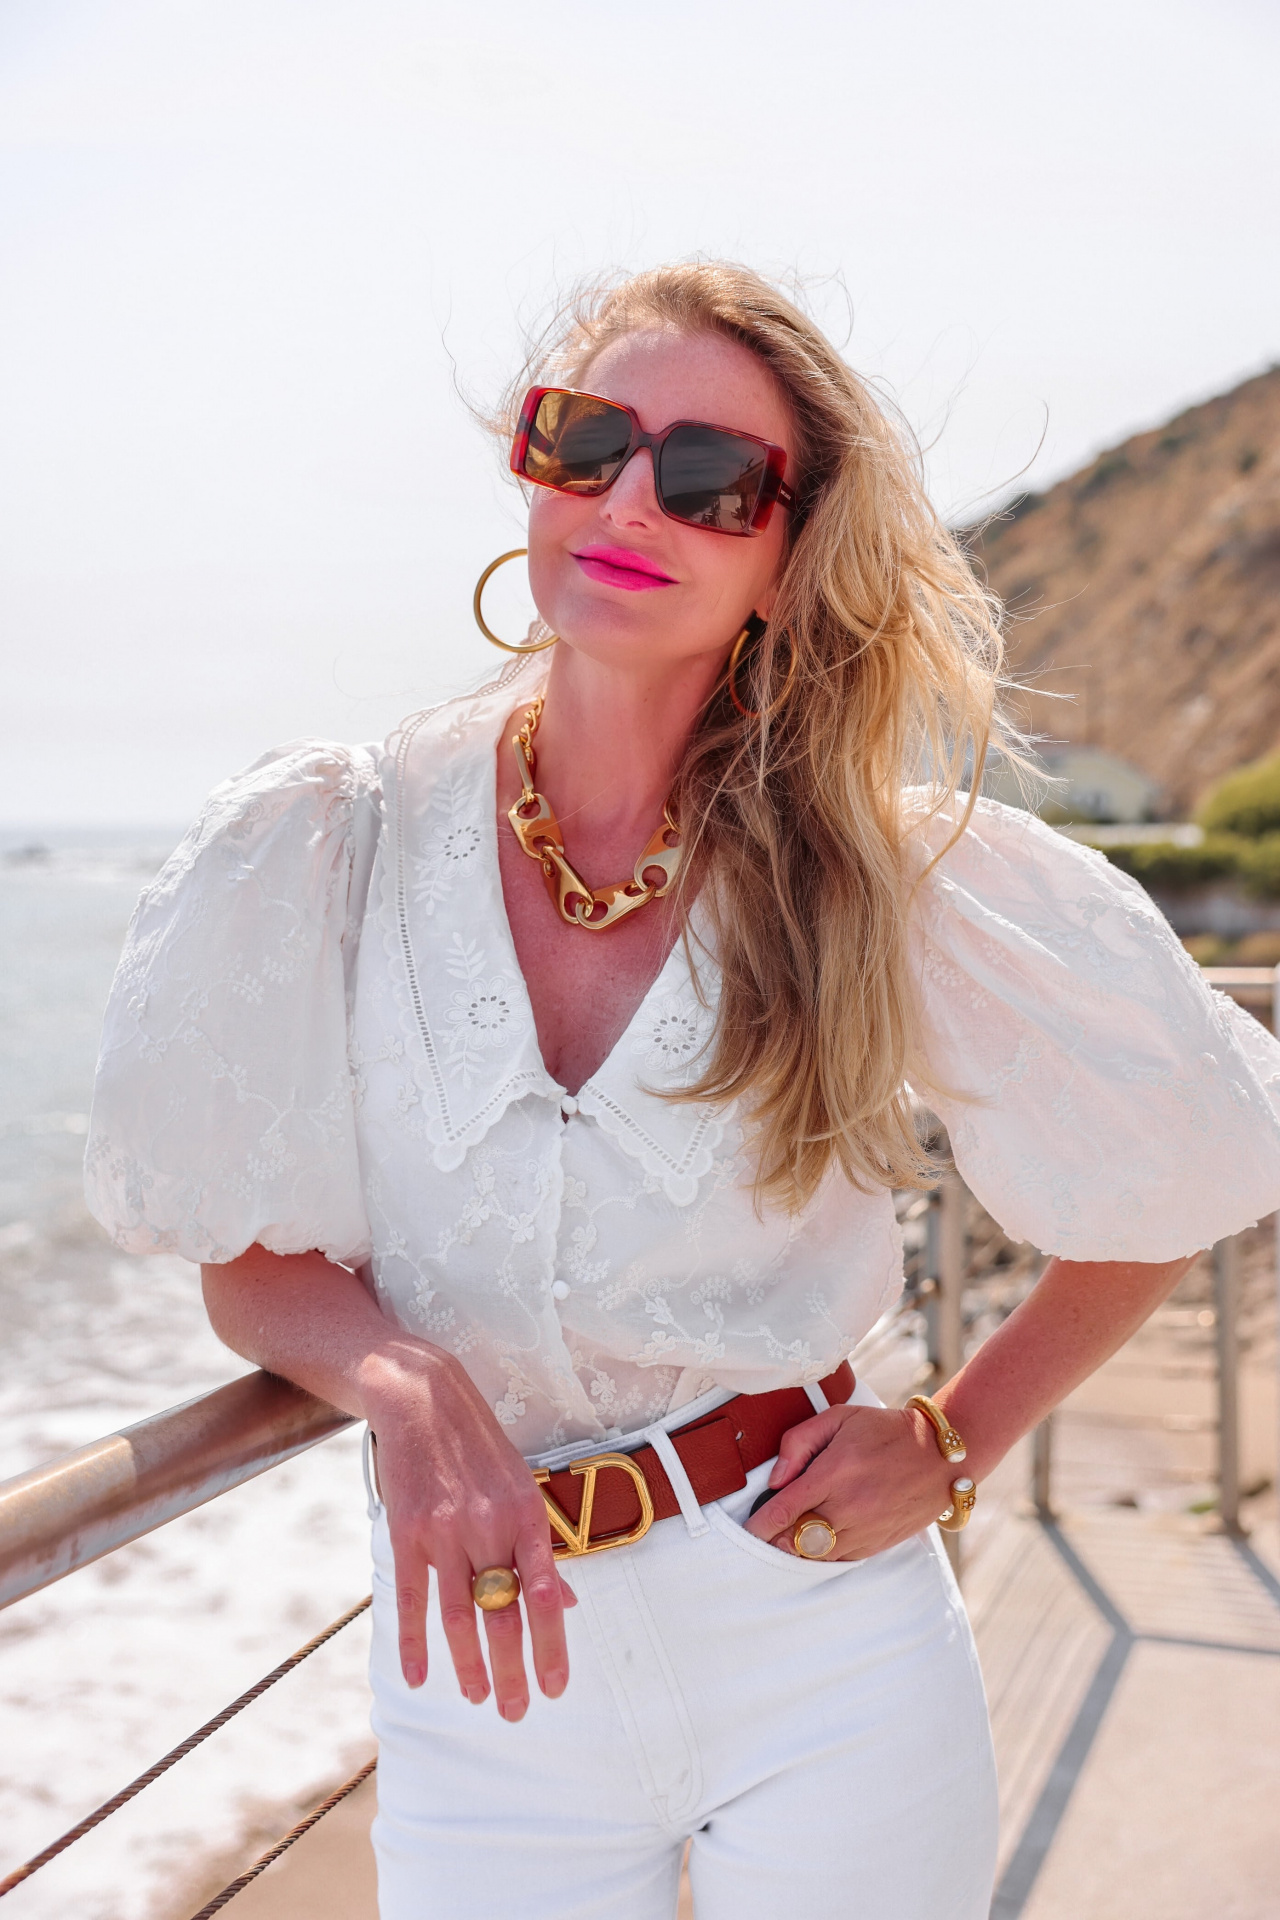 summer mom style, best summer mom outfits, summer mom outfits 2022, casual mom outfits summer, stylish mom outfits 2022, fashion for moms in their 30s, fashion for moms in their 40s, cute mom outfits, casual mom outfits, erin busbee, busbee style, fashion over 40, malibu, california, white maje blouse, white mother hustler jeans, see by chloe platform heels, saint laurent square sunglasses, paco rabbane chunky gold necklace, dean davidson hoops,How to wear white jeans, high waisted white jeans, how to wear white jeans in summer, white jeans for women, what to wear with white jeans